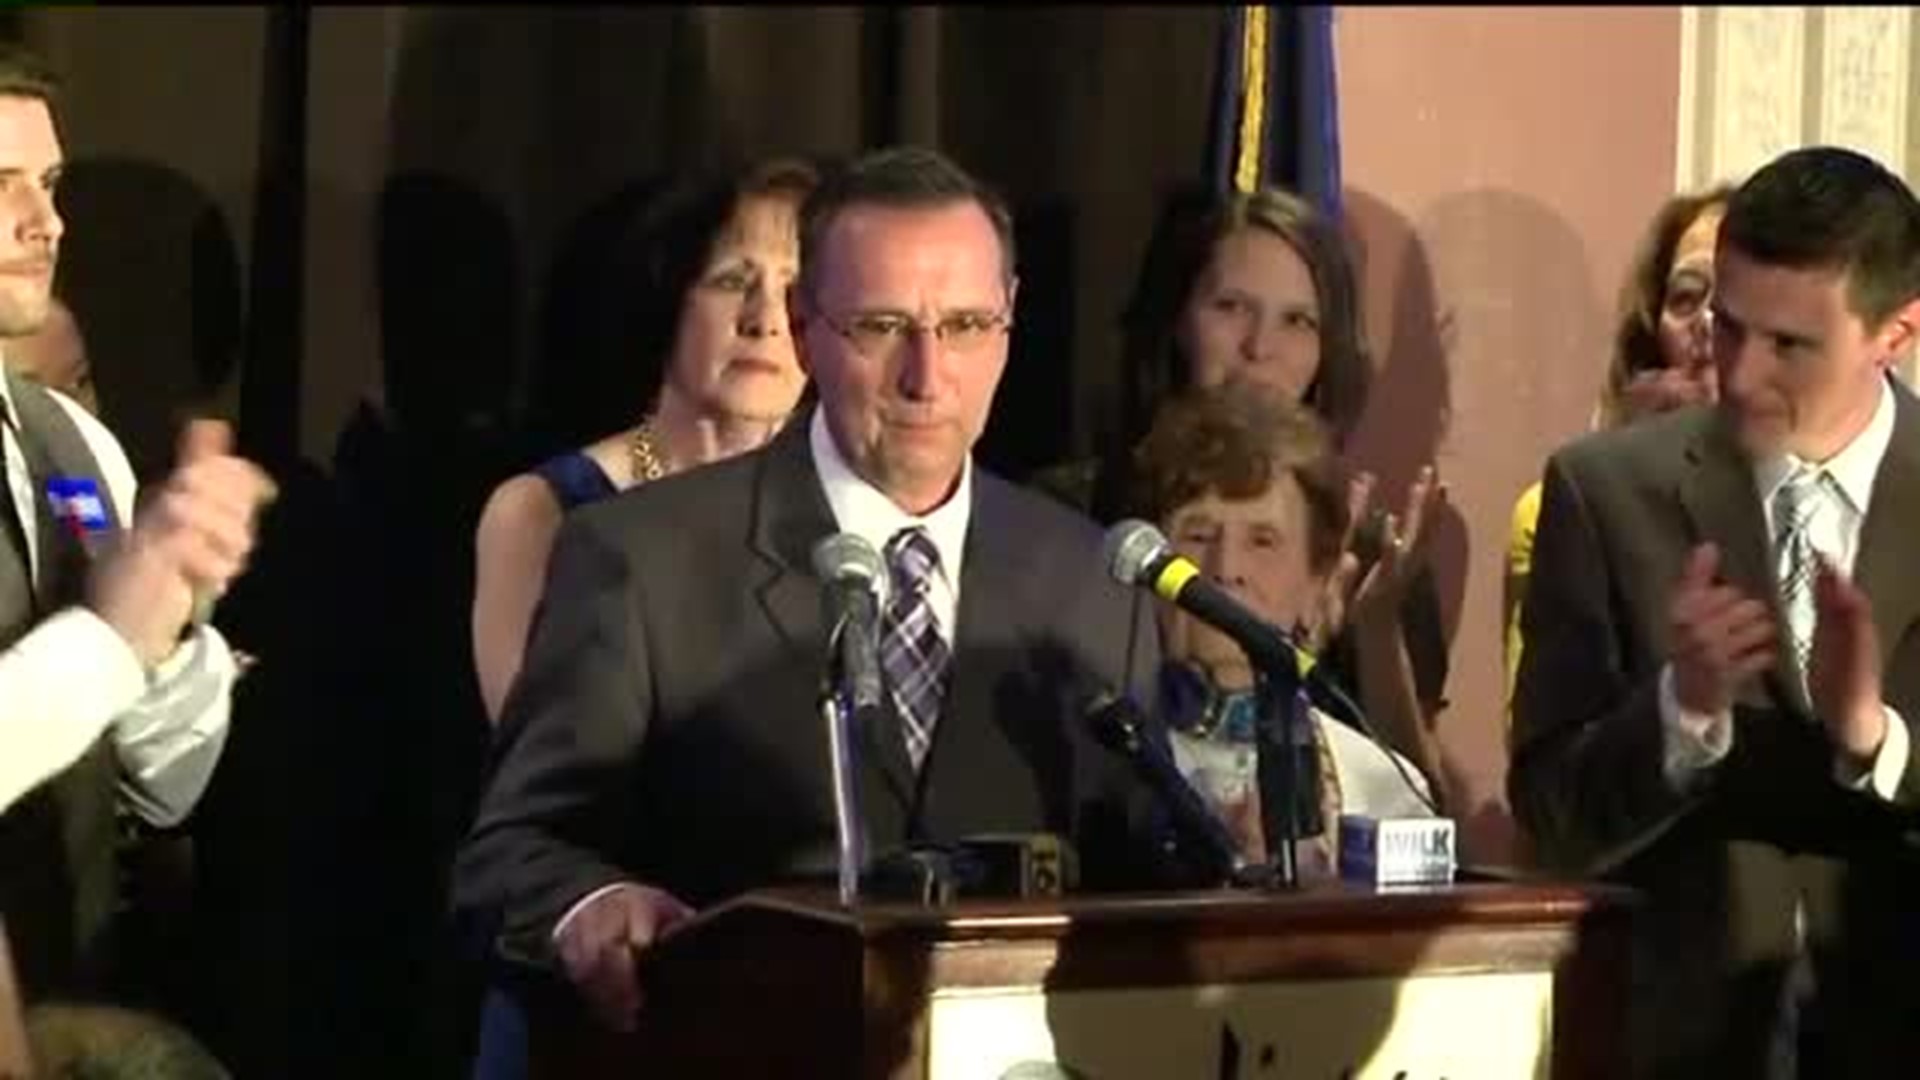 Scranton Mayor Bill Courtright Resigns After Federal Plea Deal on Corruption Charges